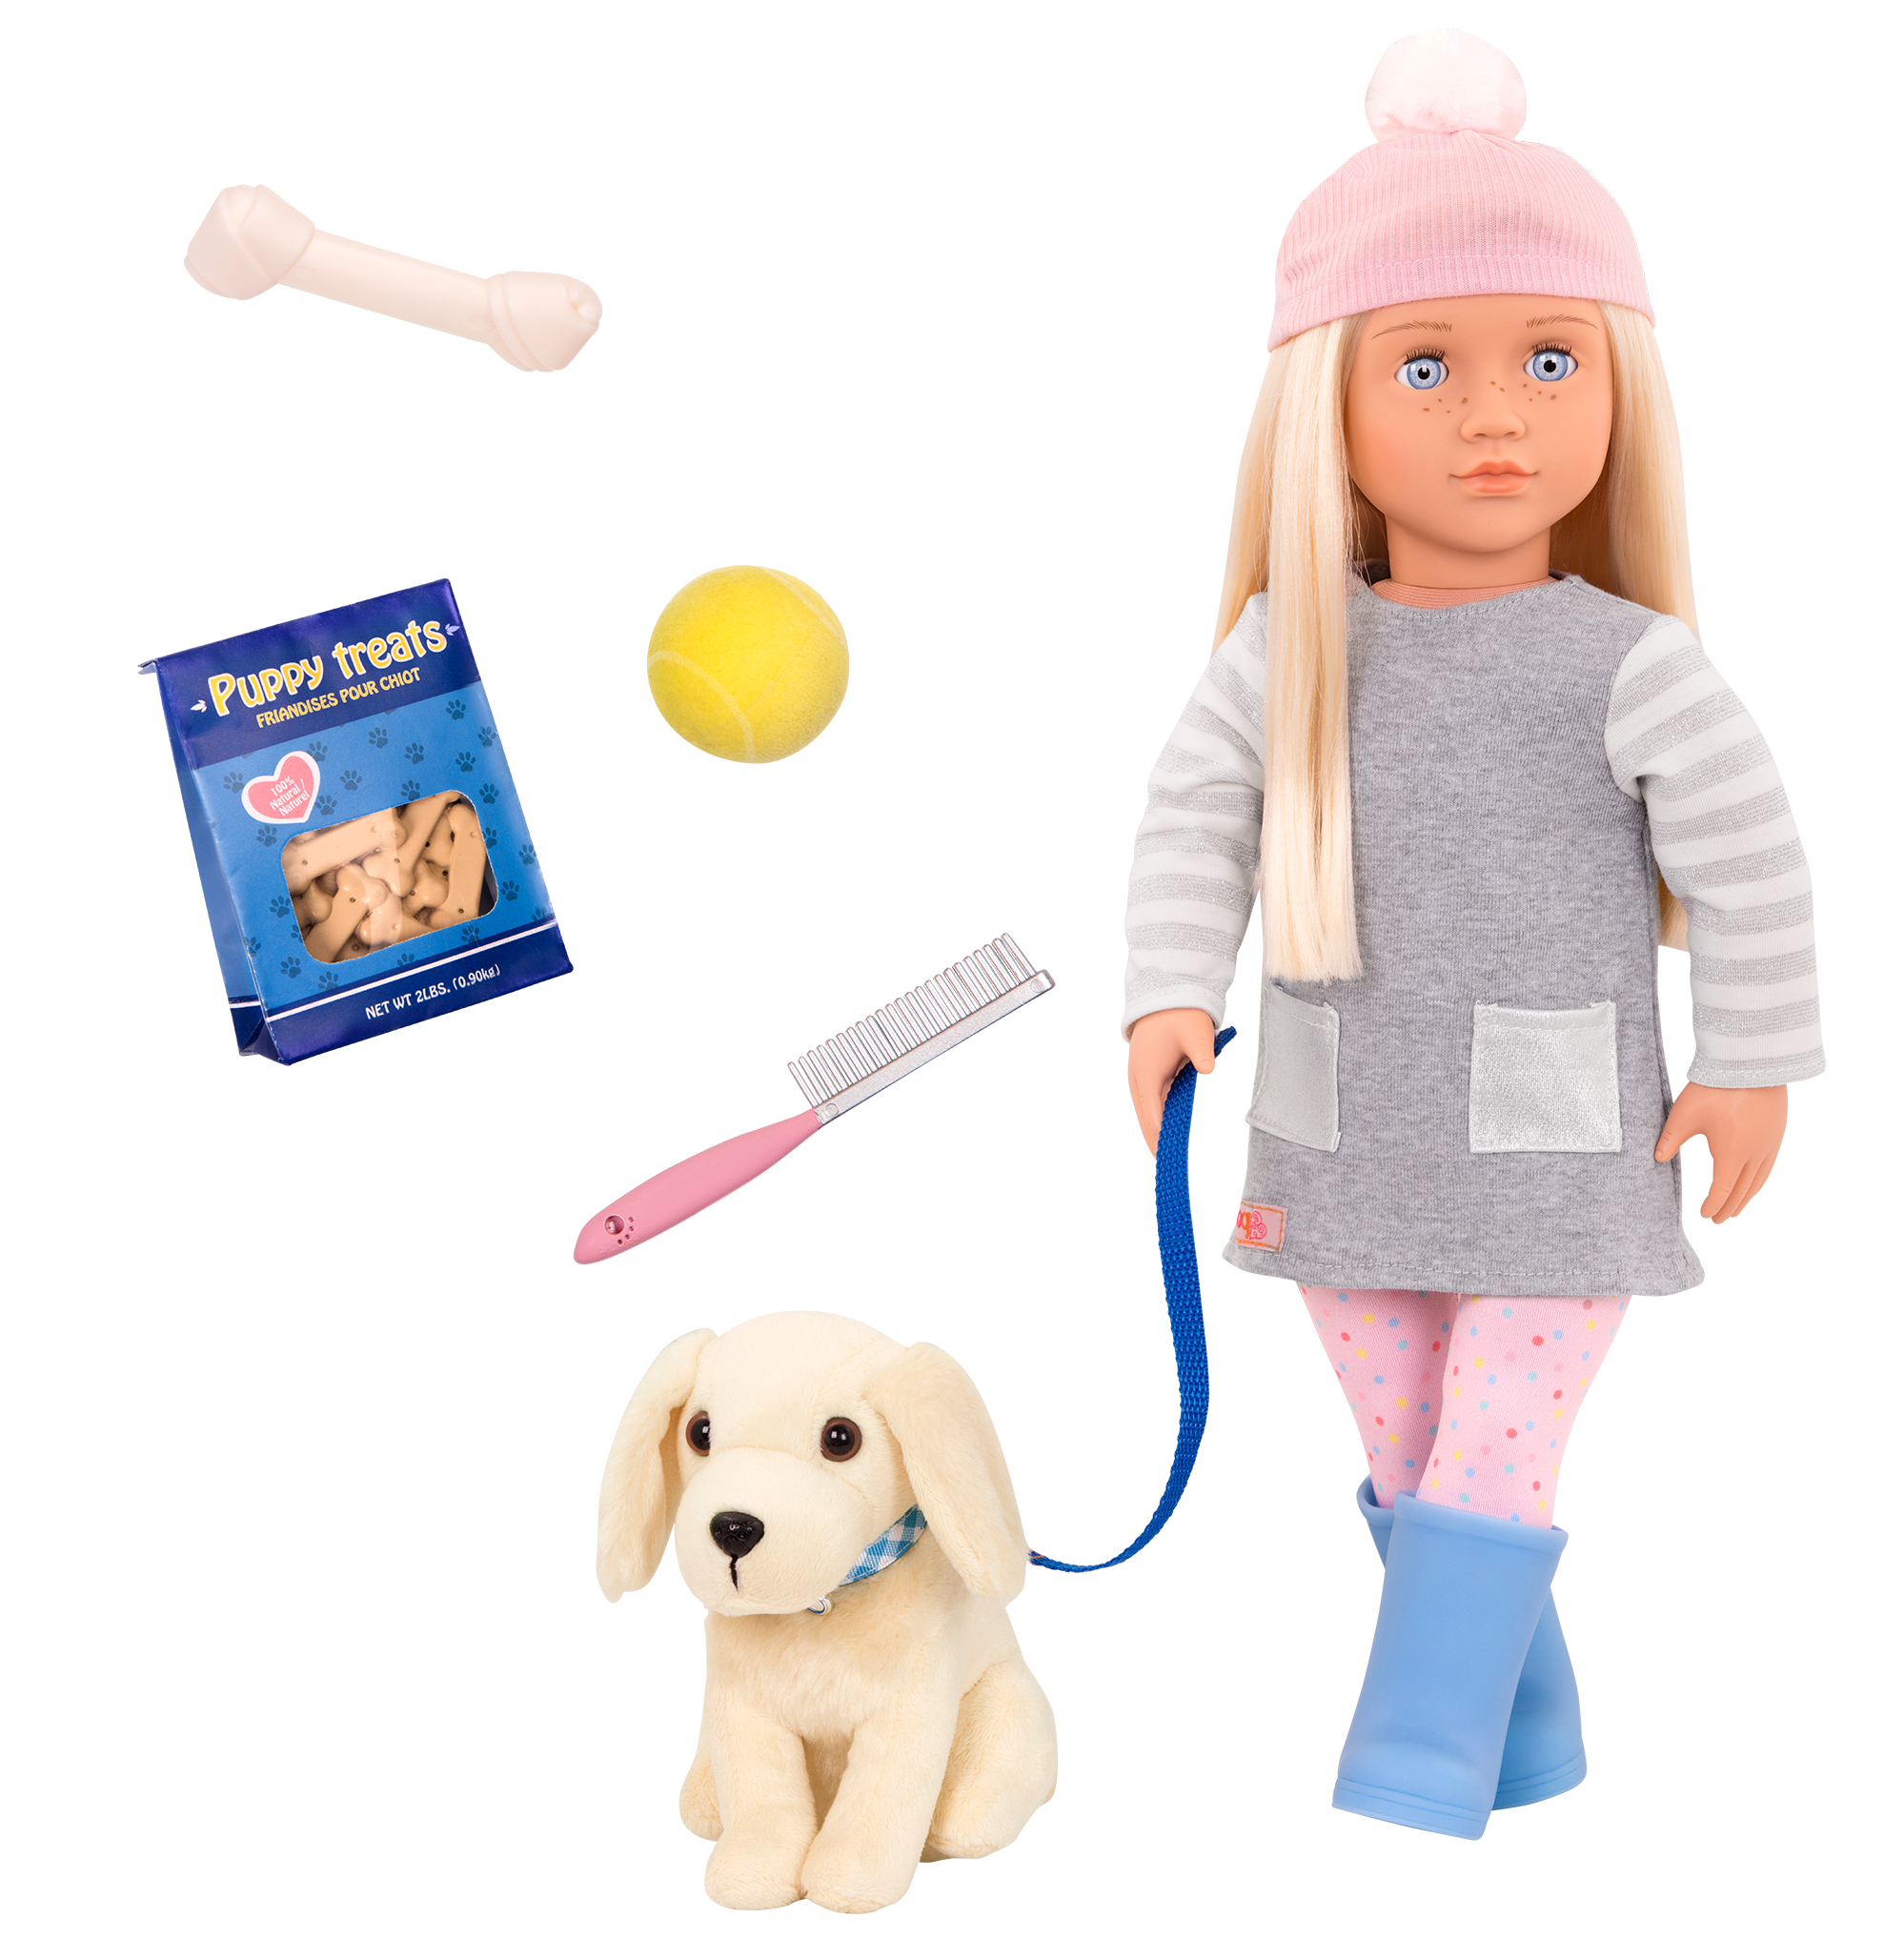 Meagan and Golden Retriever 18-inch doll and pet